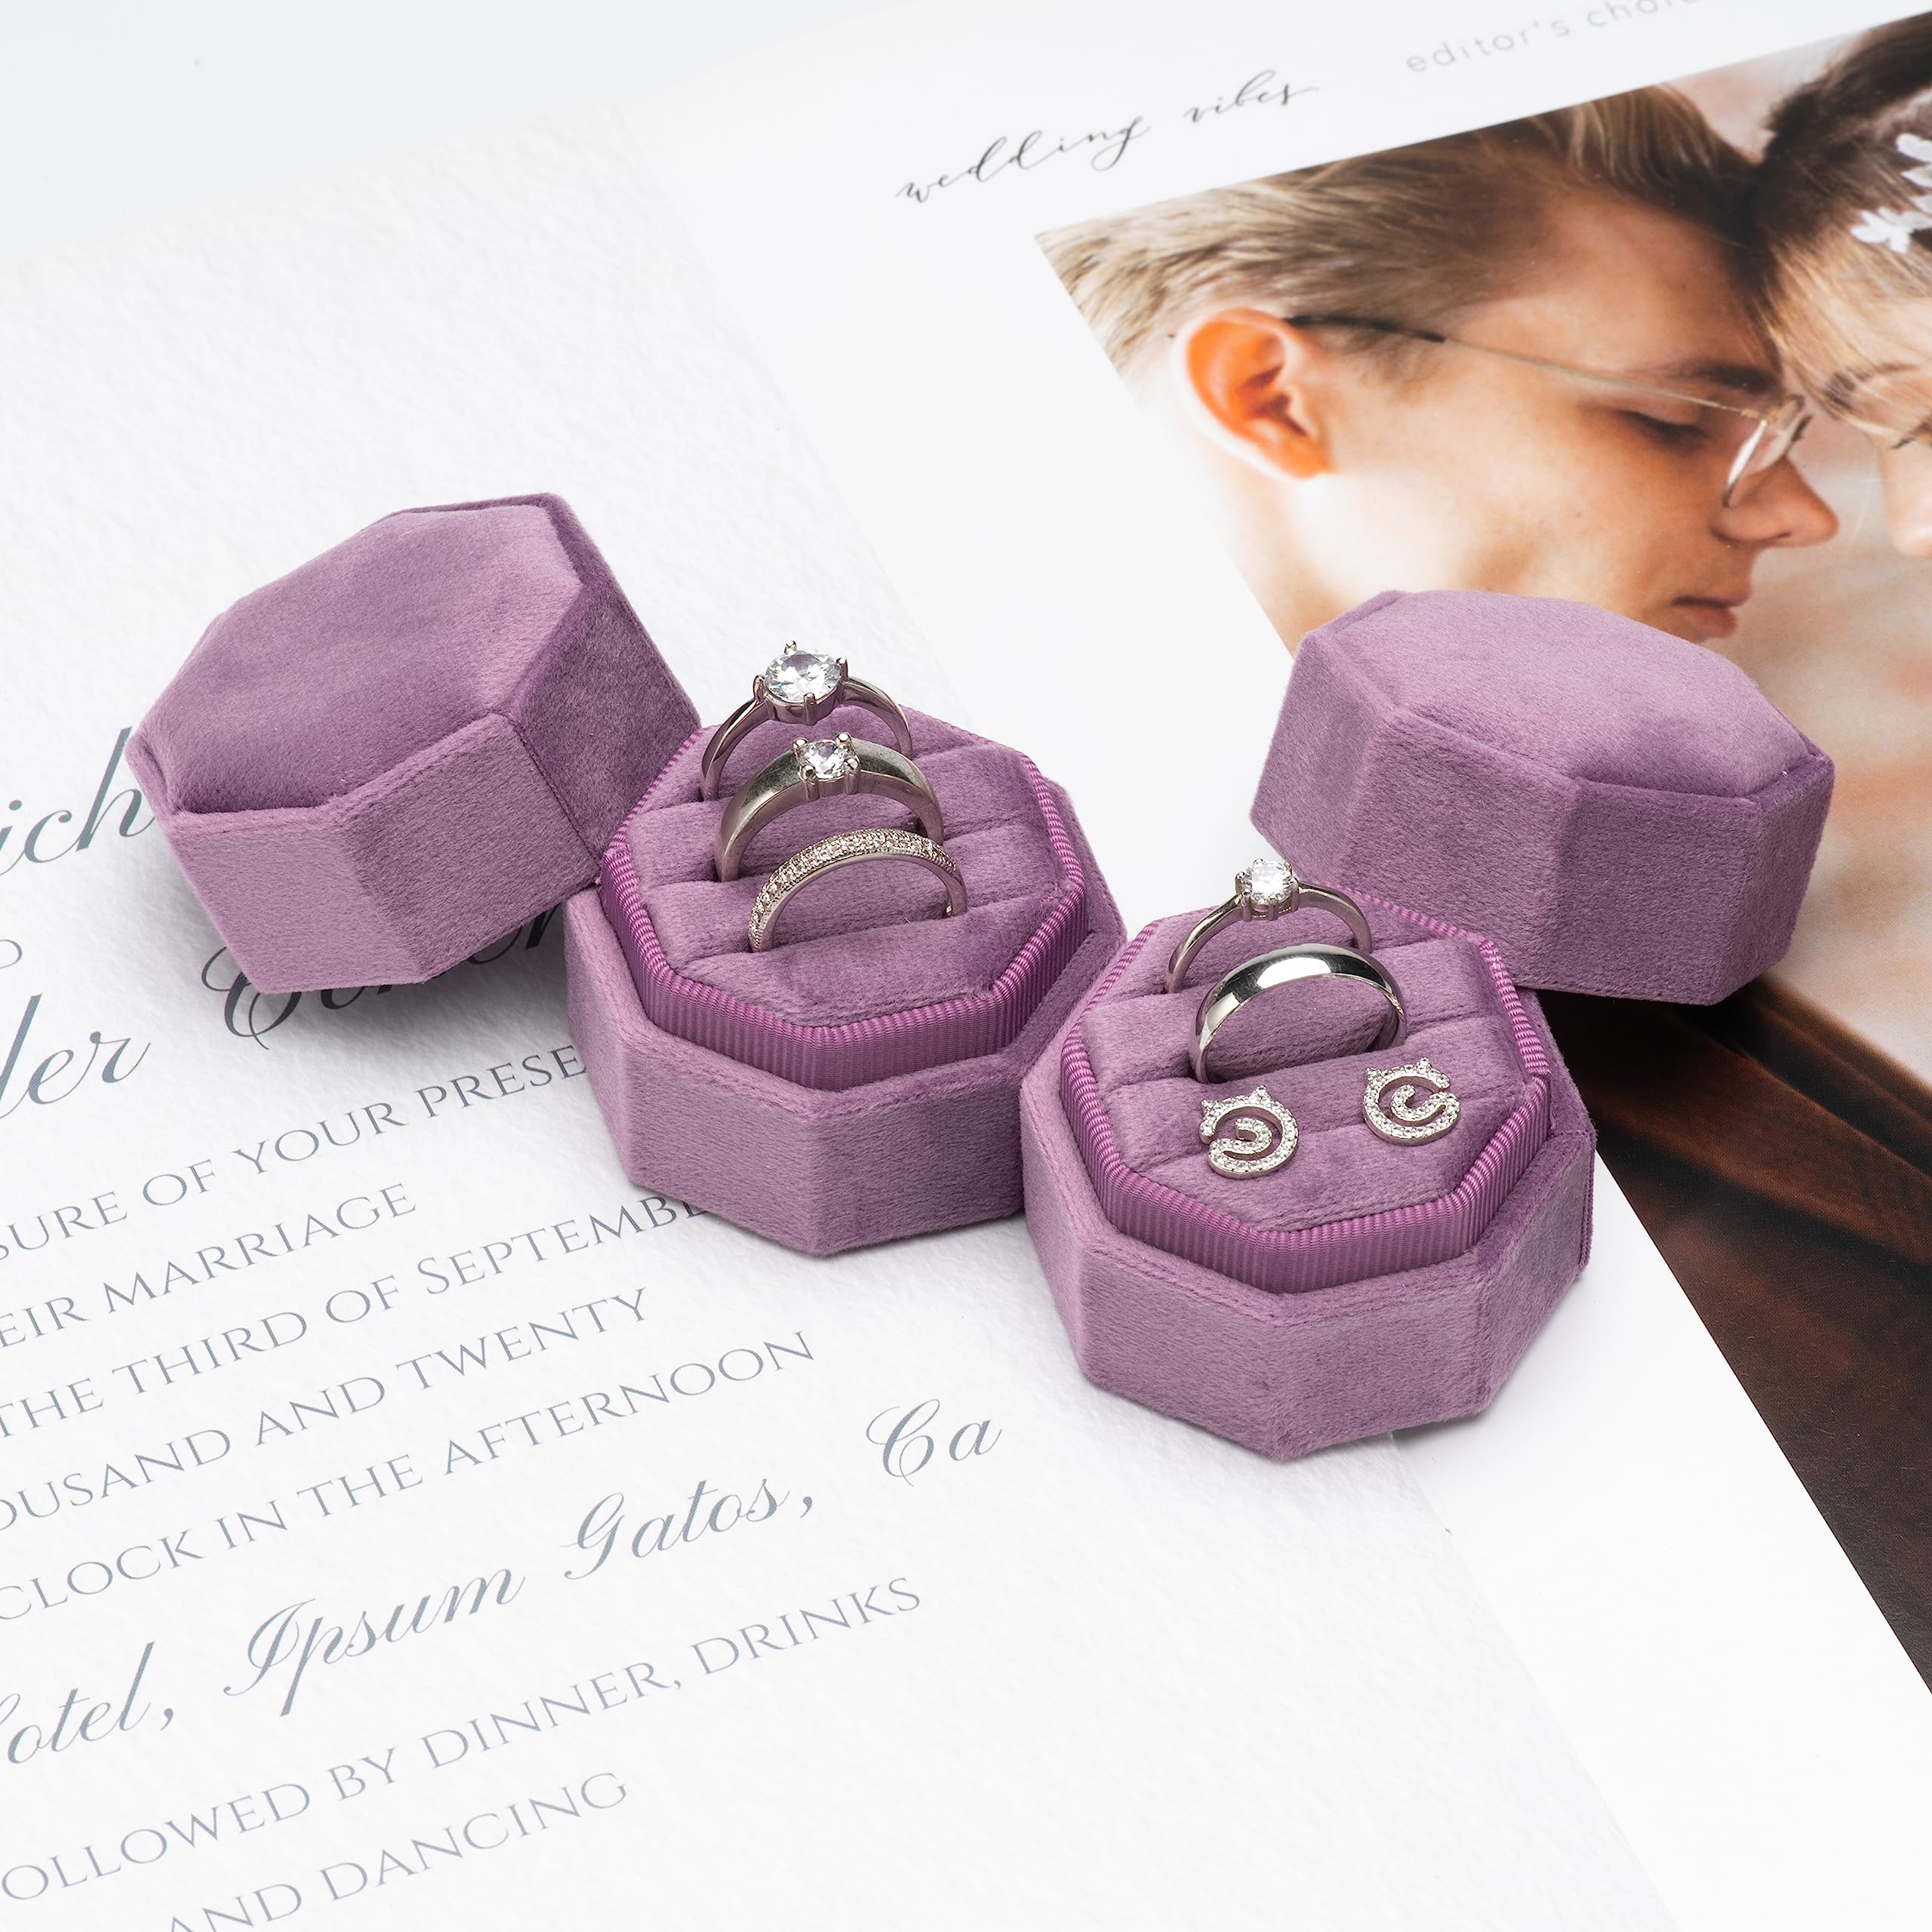 Giftop Equal Octagon Velvet Ring Box Storage 3 Slots for Wedding Ceremony Proposal Engagement Birthday Gift (Purple)